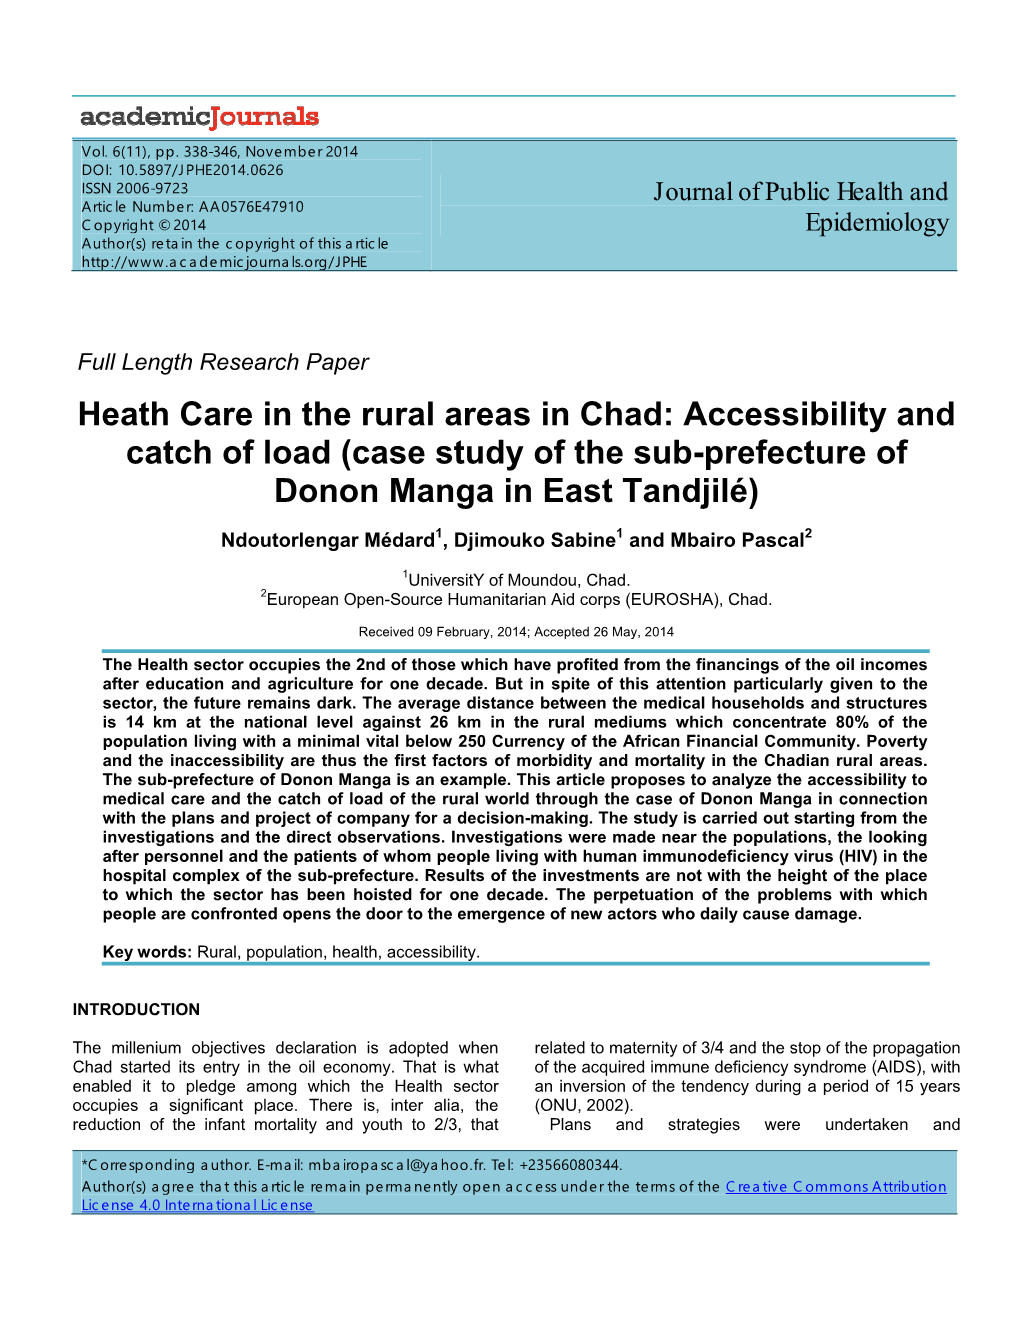 Heath Care in the Rural Areas in Chad: Accessibility and Catch of Load (Case Study of the Sub-Prefecture of Donon Manga in East Tandjilé)